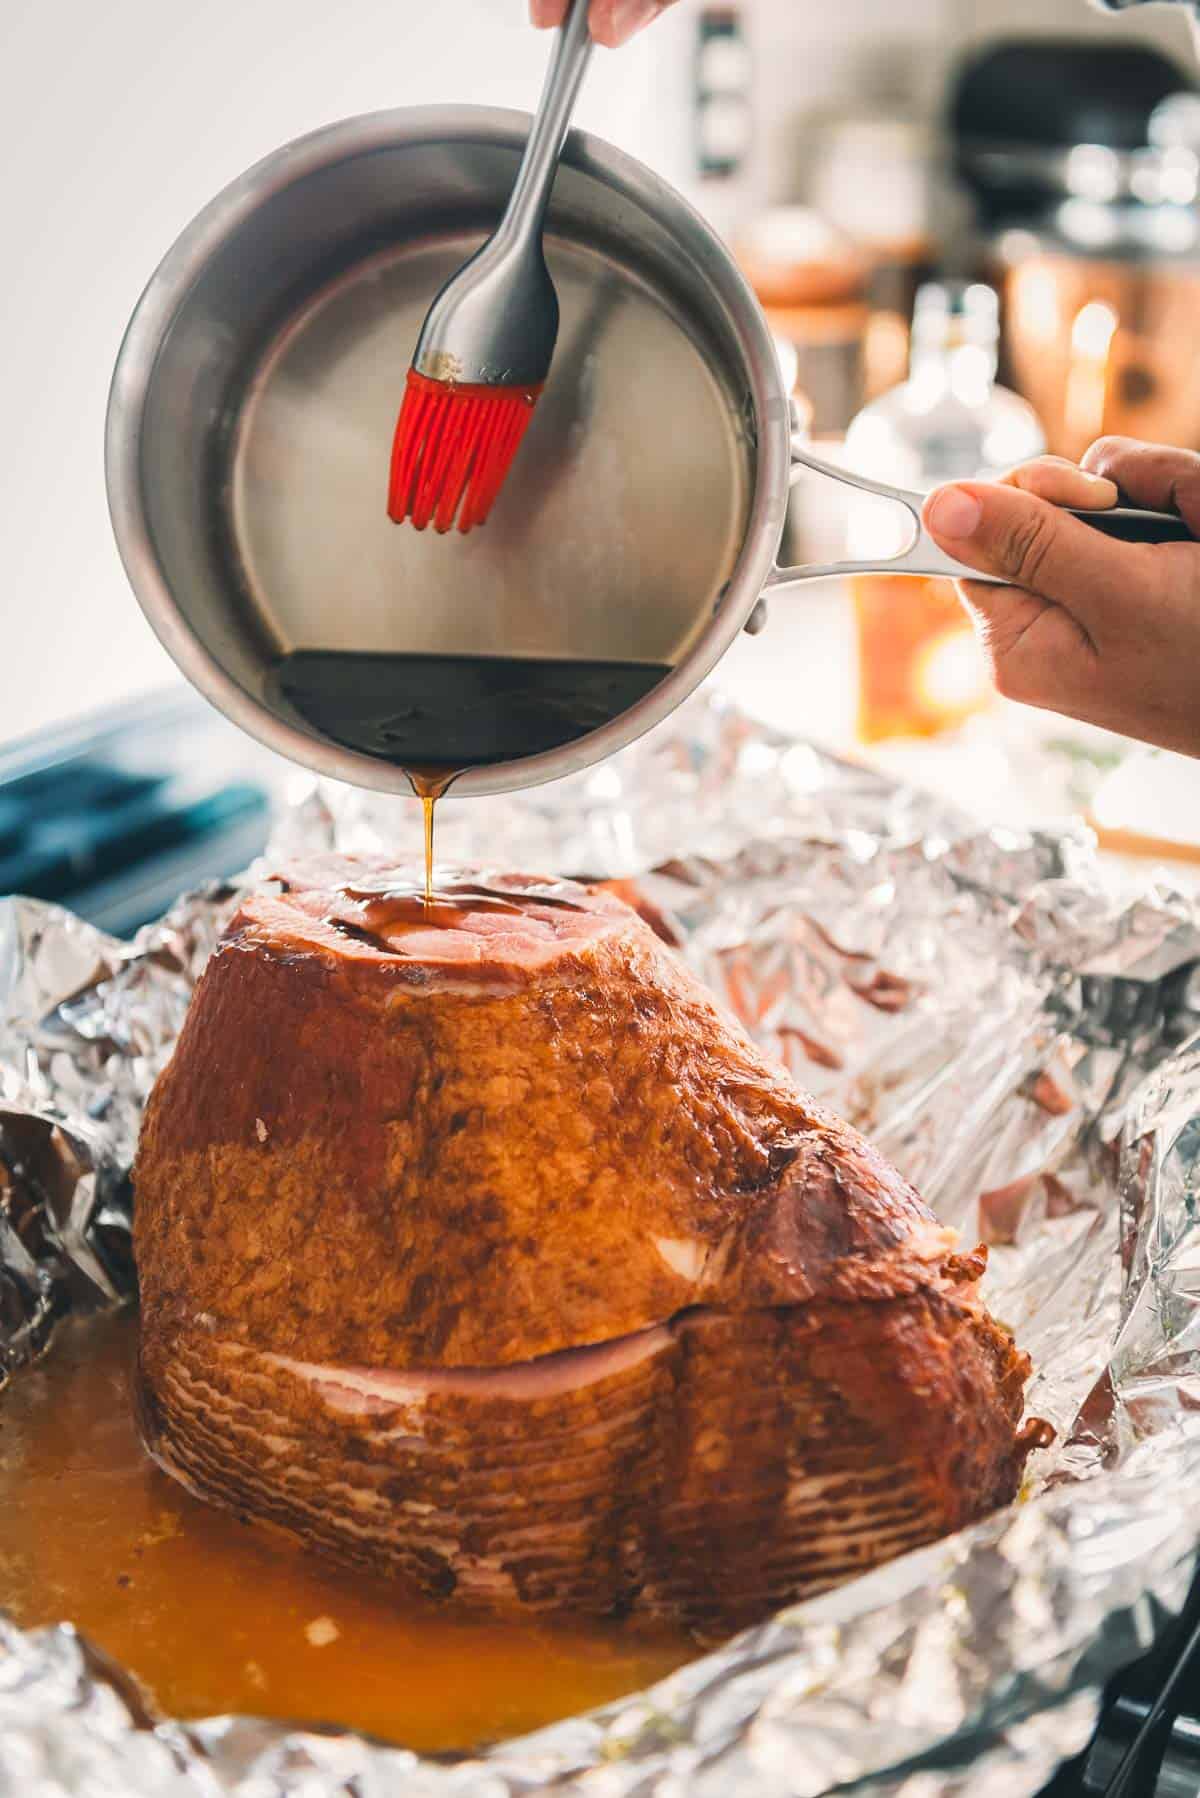 A person pouring a glaze over a roasted ham.